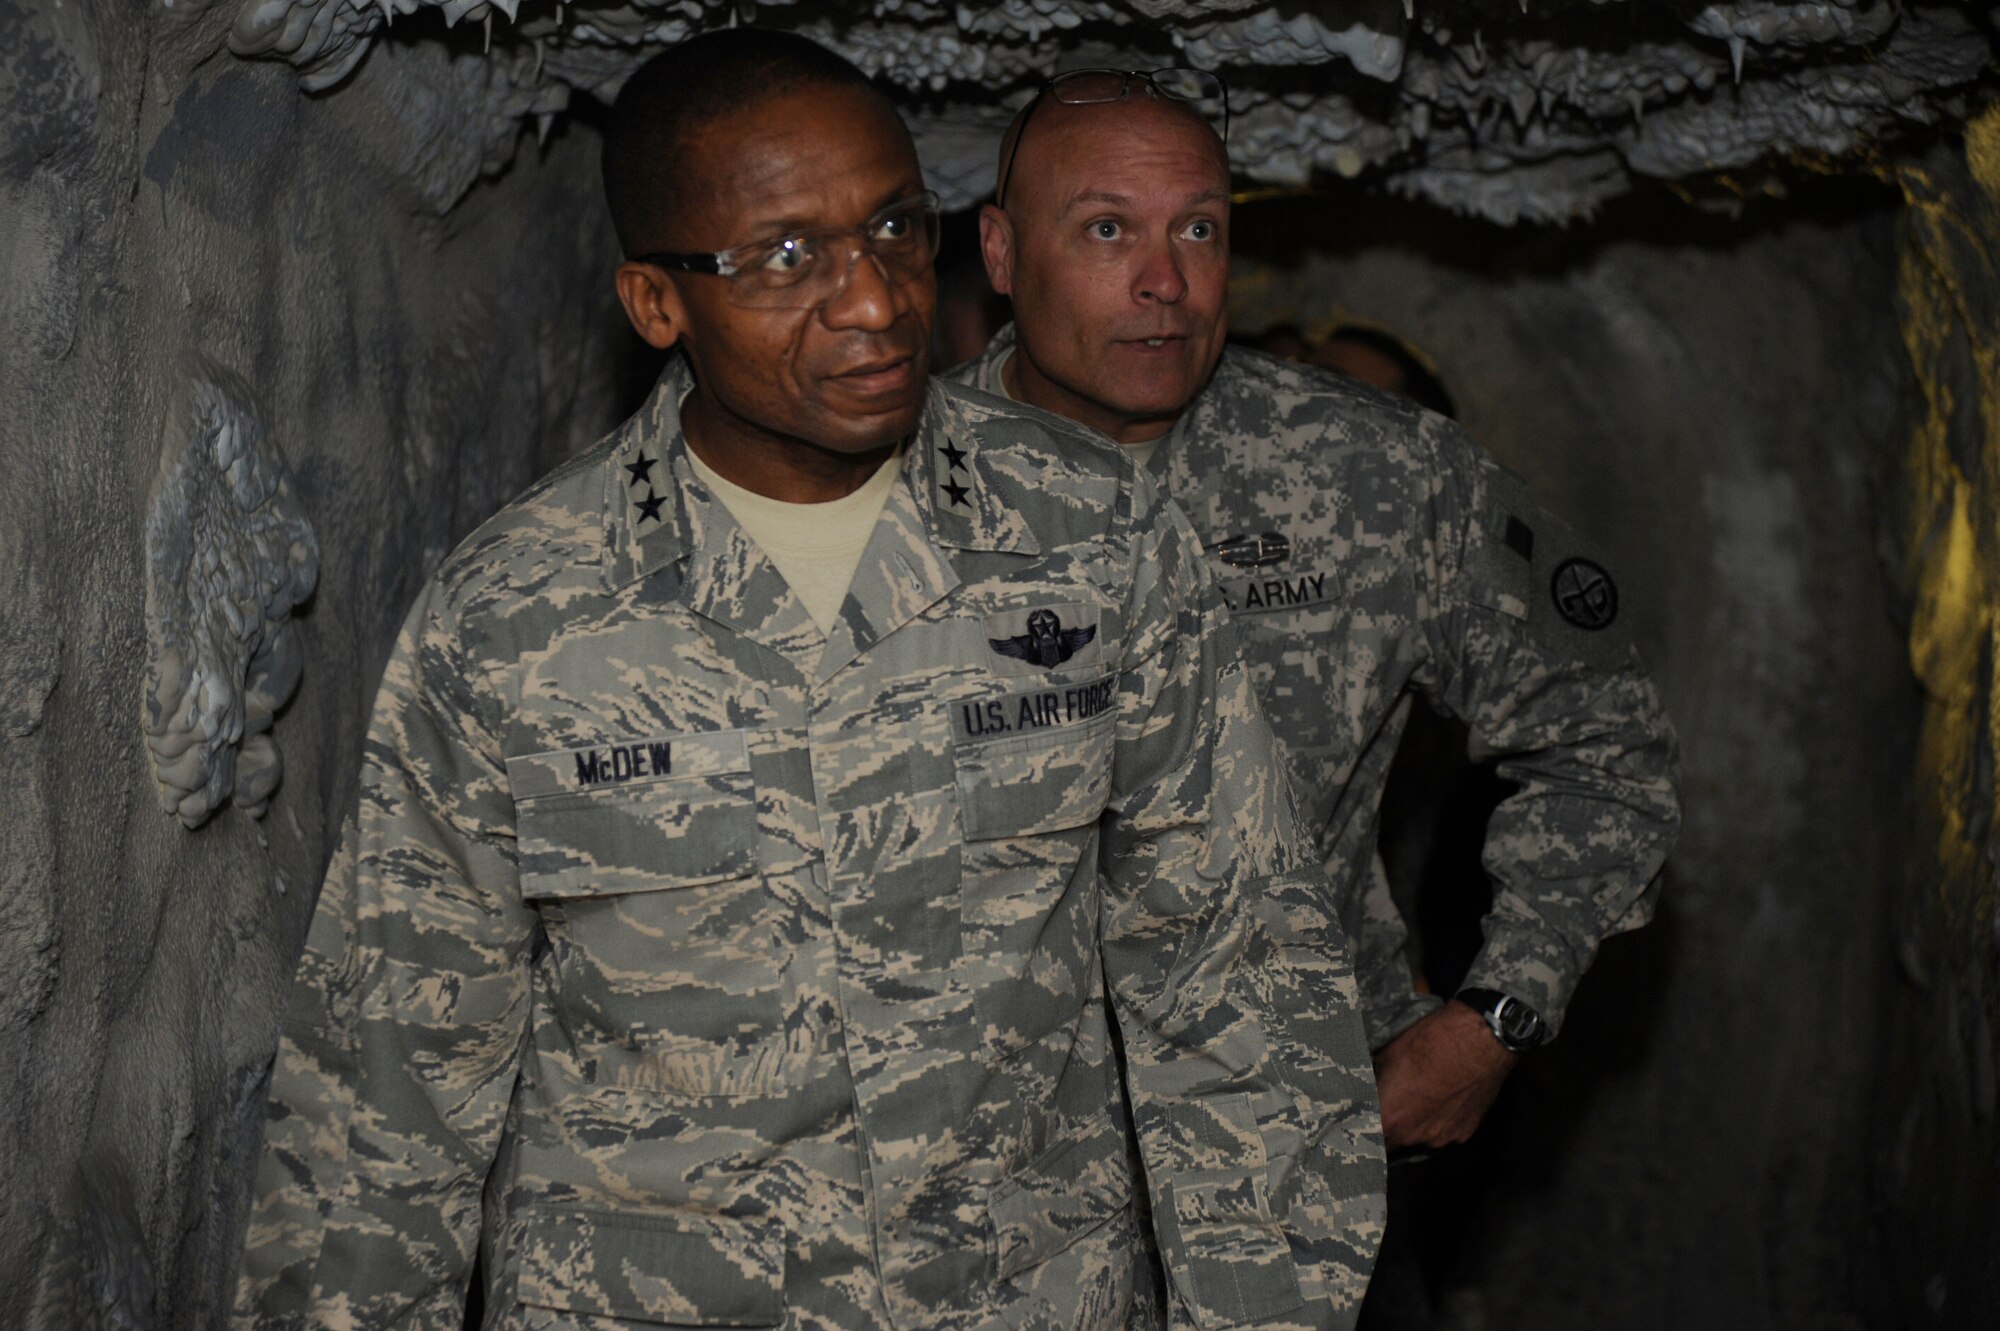 Air Force District of Washington Commander Maj. Gen. Darren W. McDew tours the Center for National Response facility March 28 in Gallagher W. Va. The training center is housed in a half-mile long tunnel which has a wide assortment of training areas, including a post office, rail station, Afghanistan tunnel replica, rubble room and a metro rail car. The training center was called one of the best training venues available for emergency management career fields by civil engineer squadron emergency management officials. (U.S. Air Force photo by Staff Sgt. Christopher Ruano)